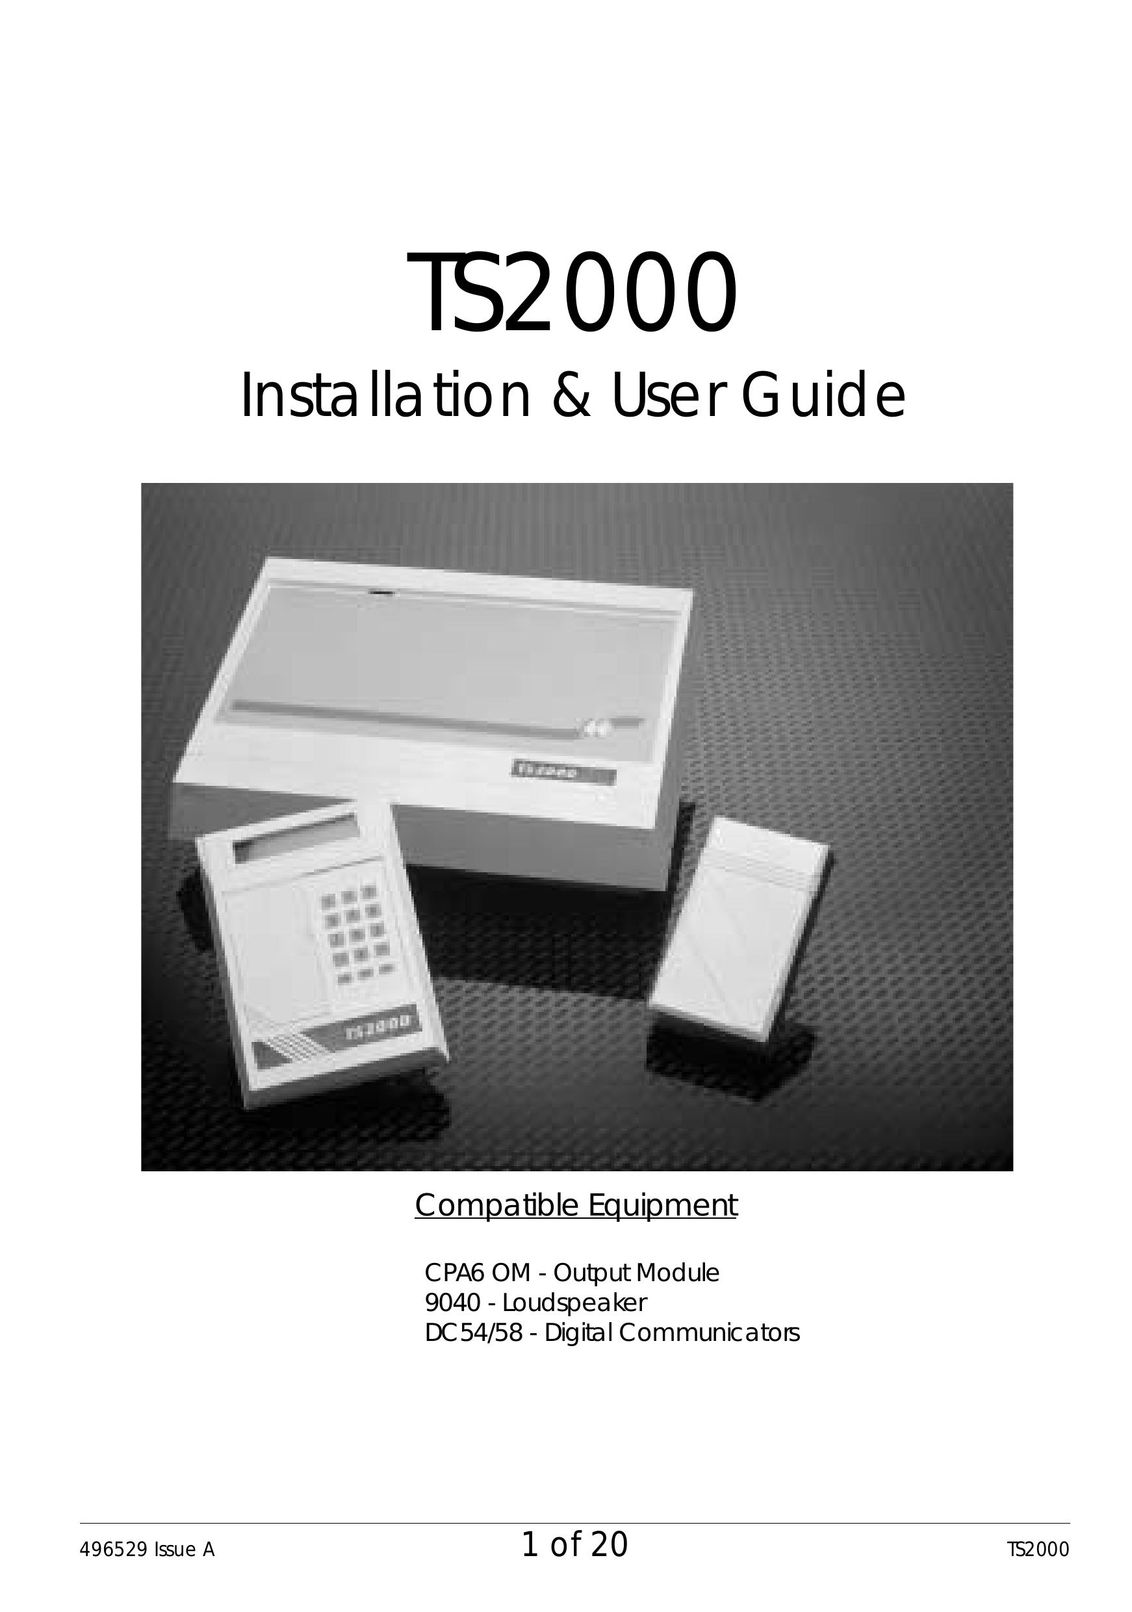 Security Centres TS2000 Home Security System User Manual